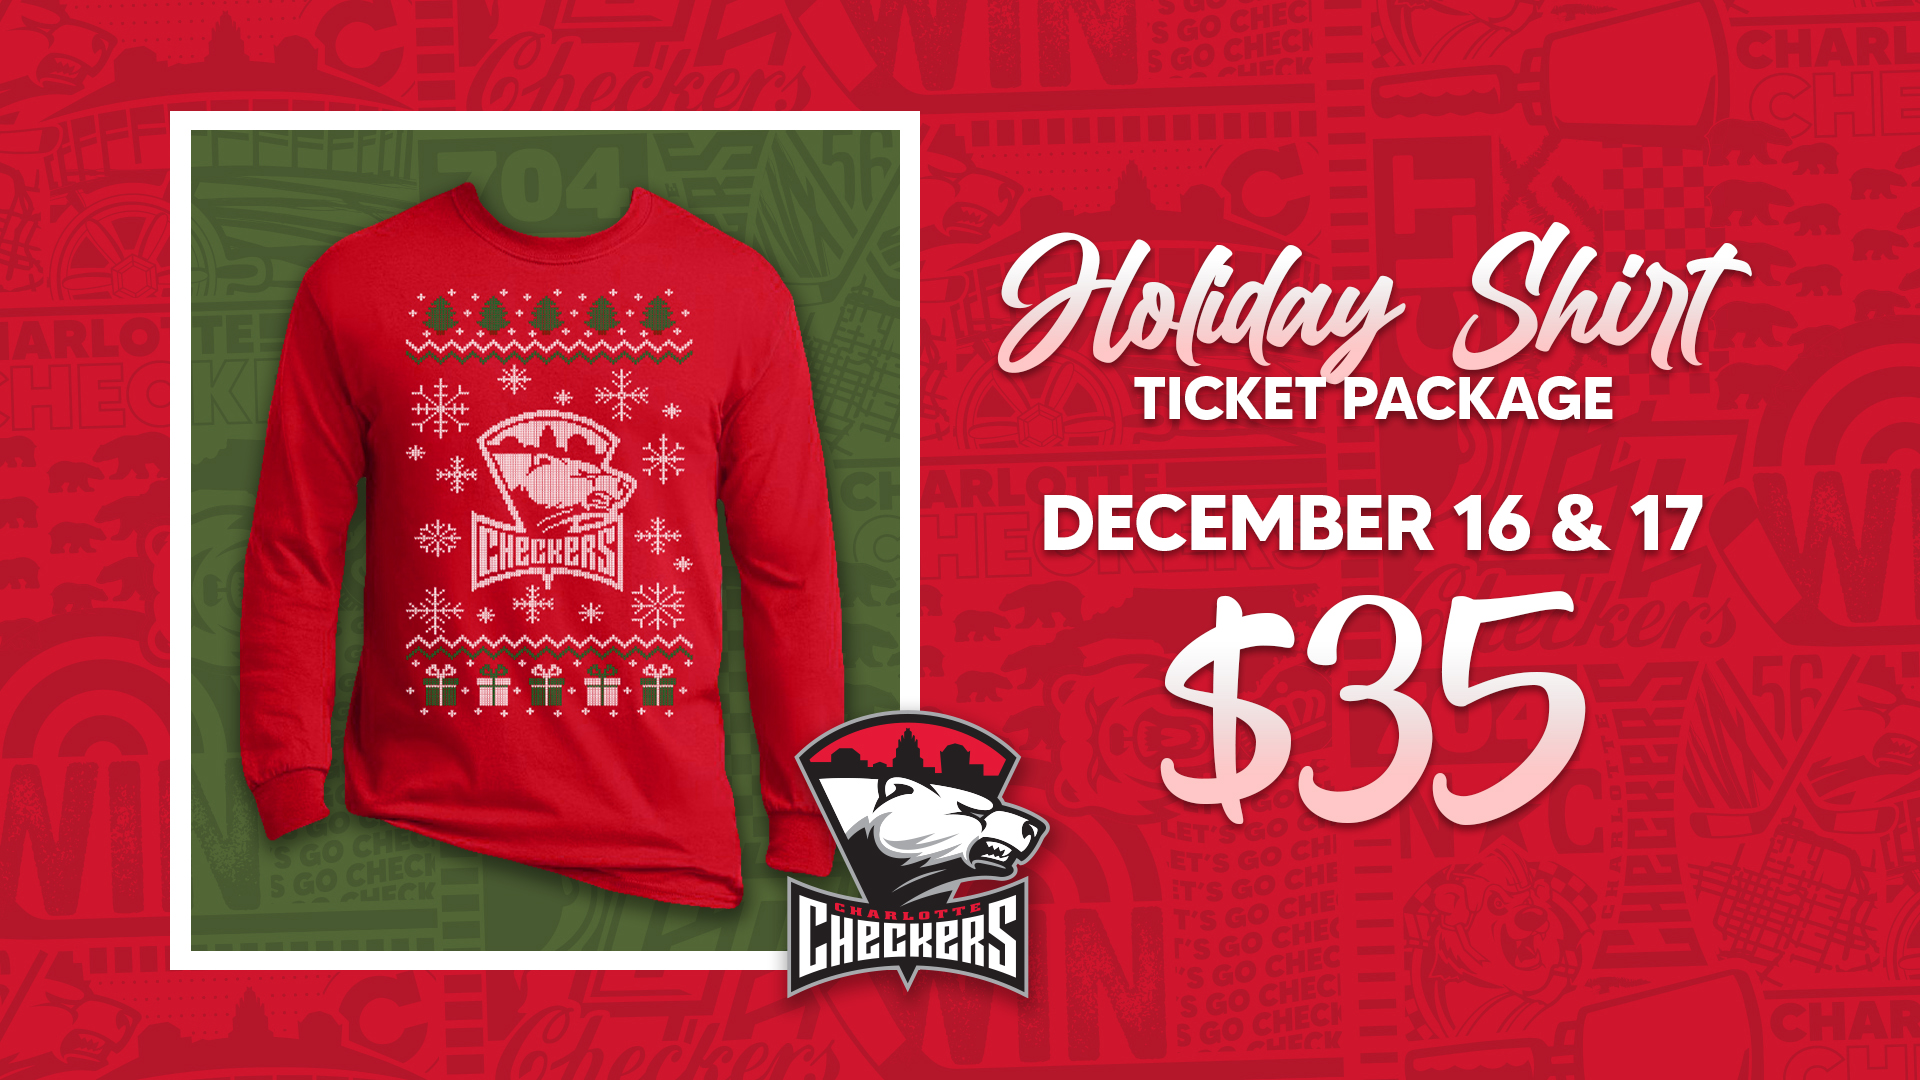 Charlotte Checkers Holiday Shirt Package